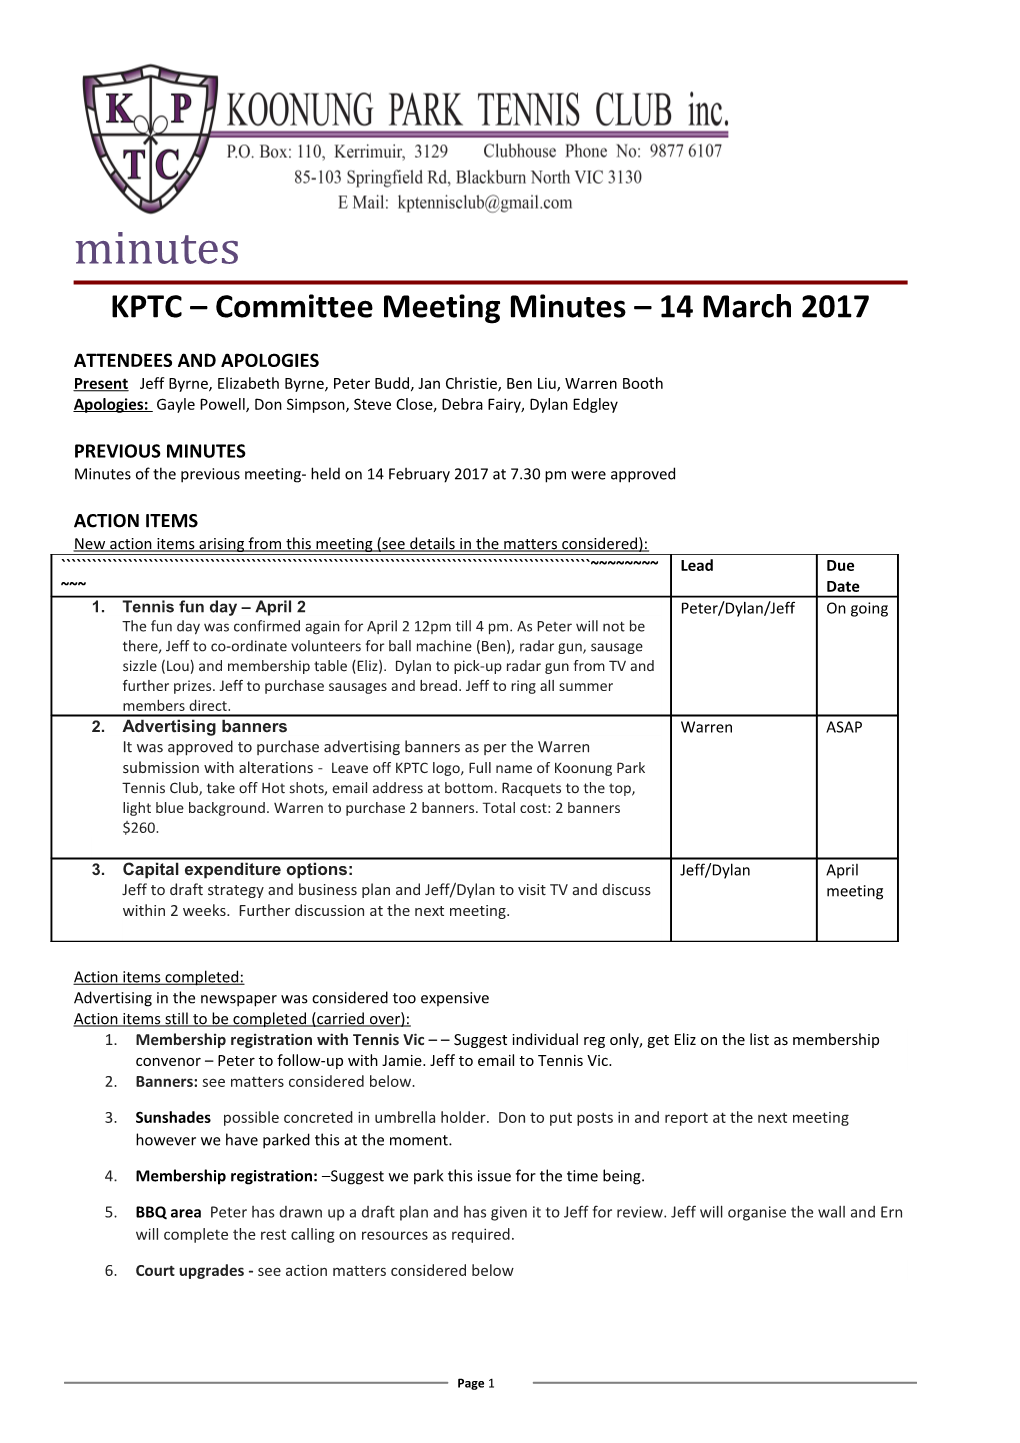 KPTC Committee Meeting Minutes 14March 2017